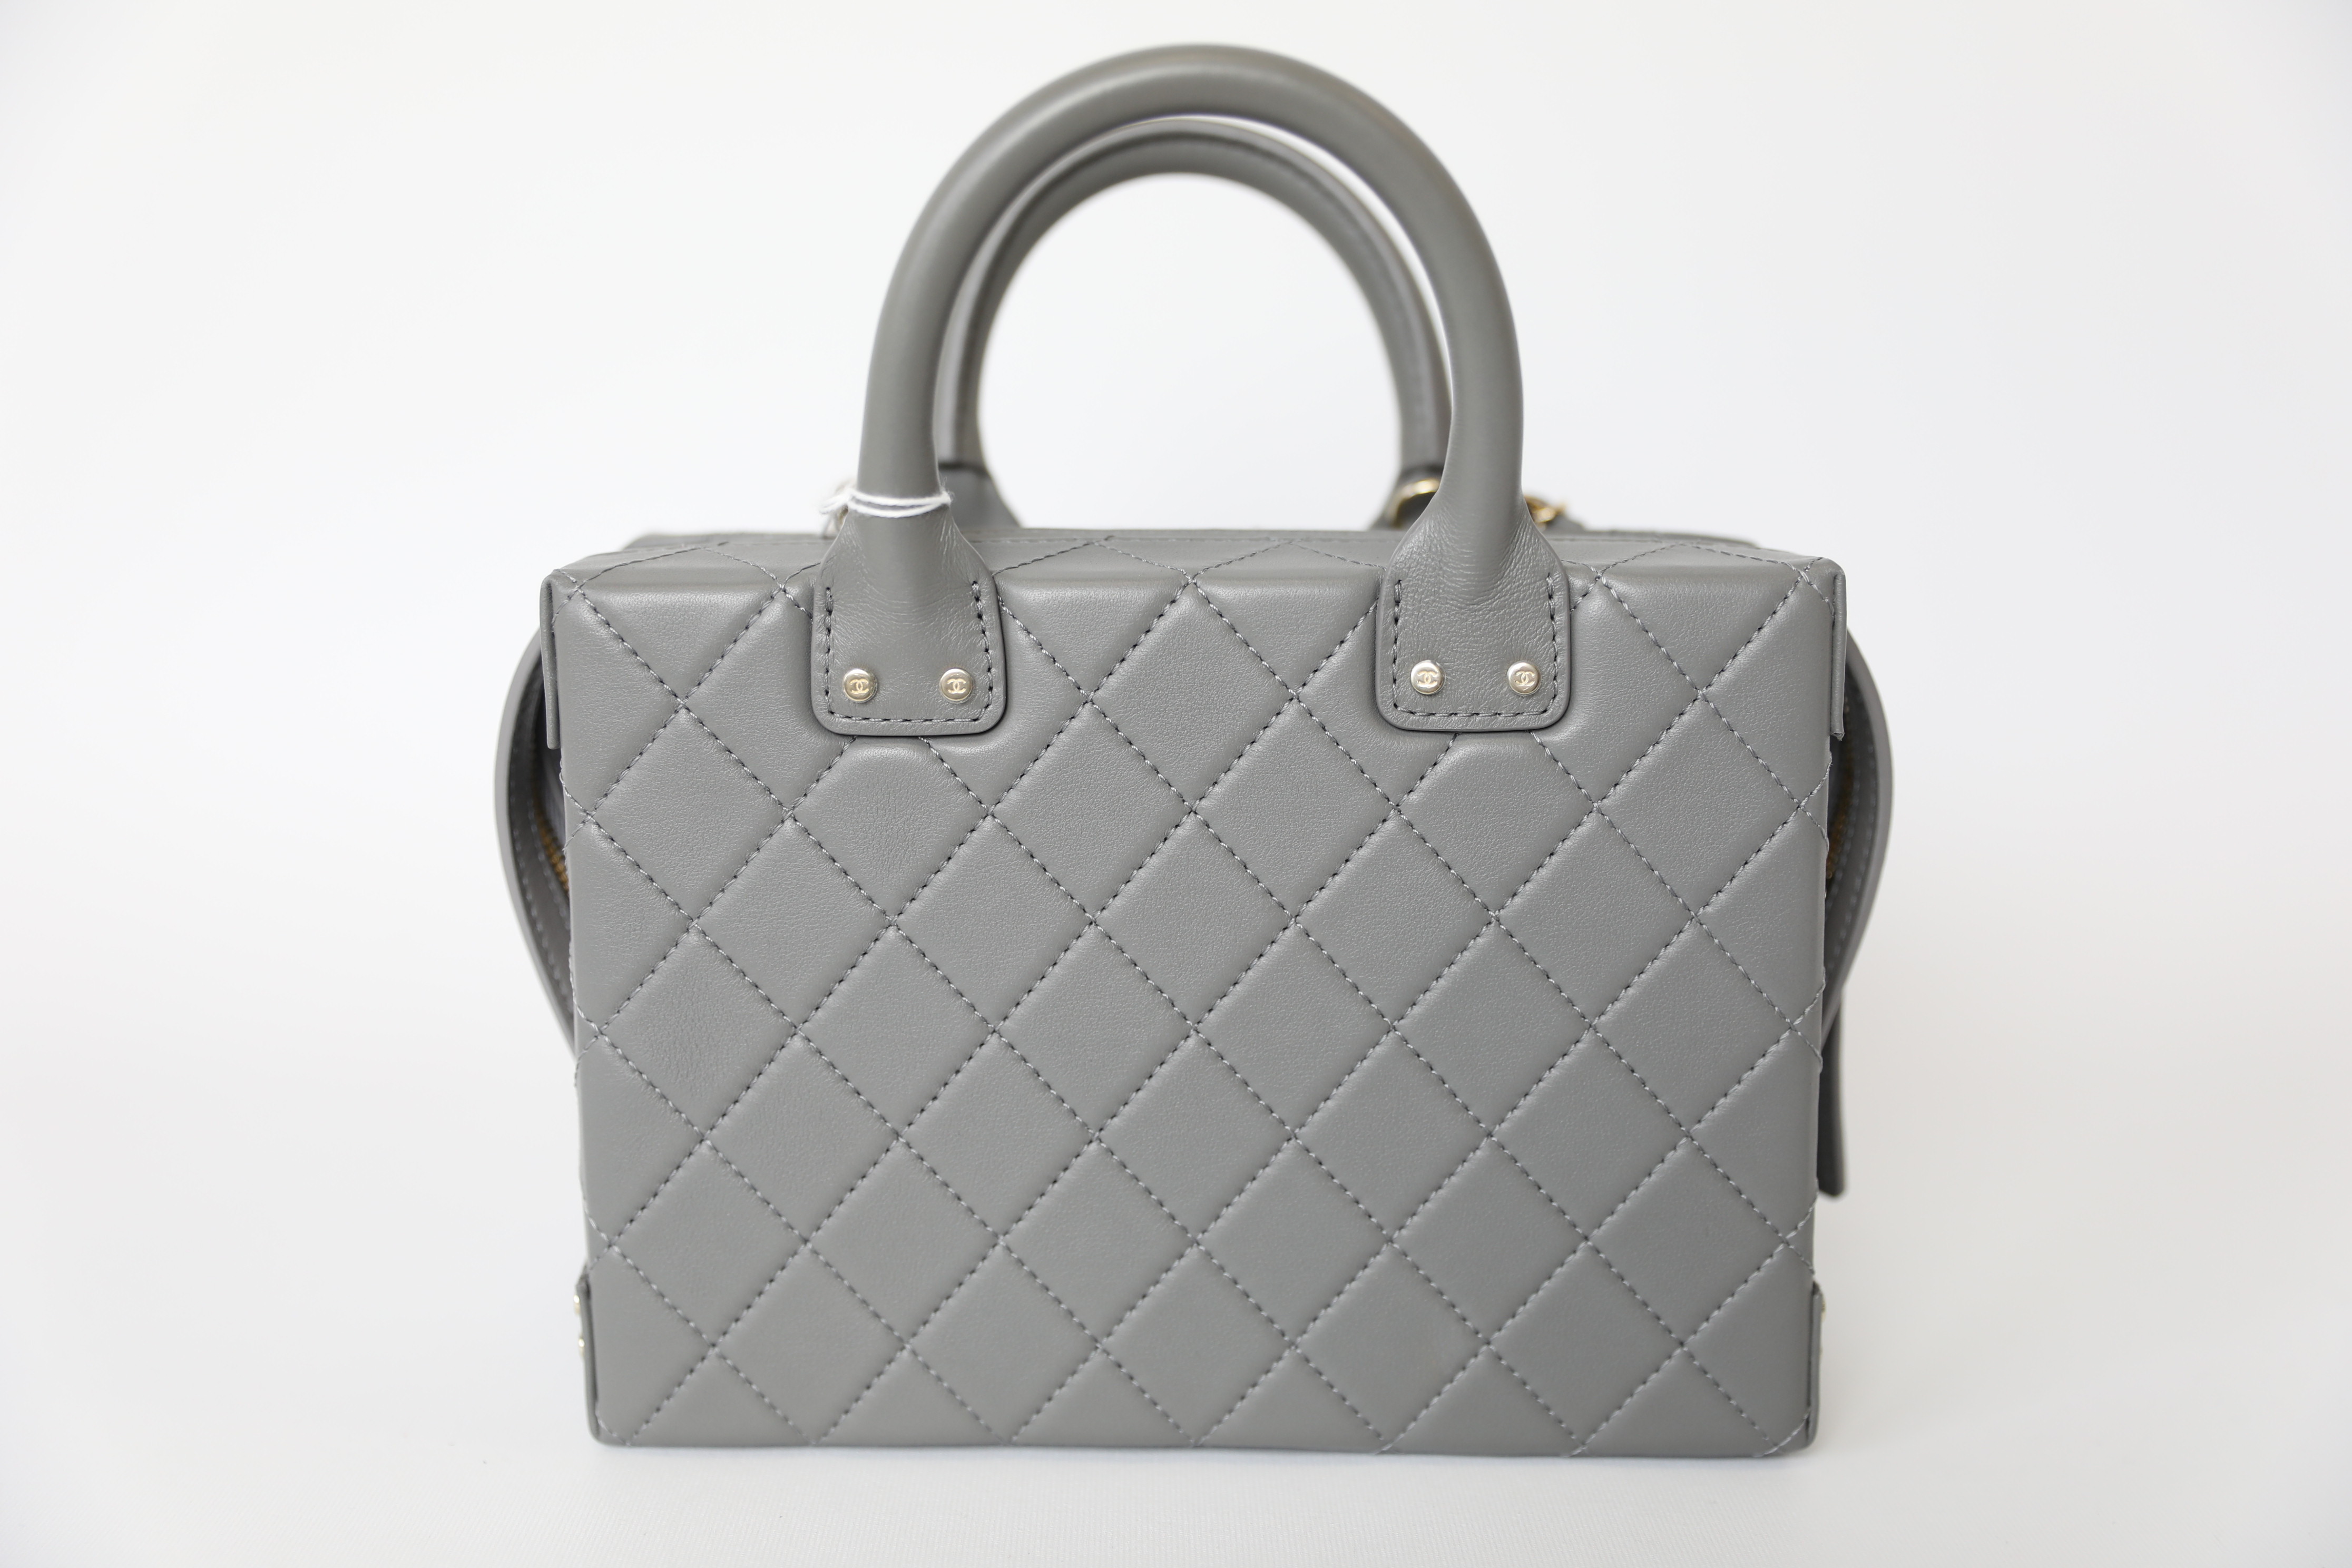 Chanel Top Handle Vanity Case, Grey Lambskin with Gold Hardware, Preowned  in Box WA001